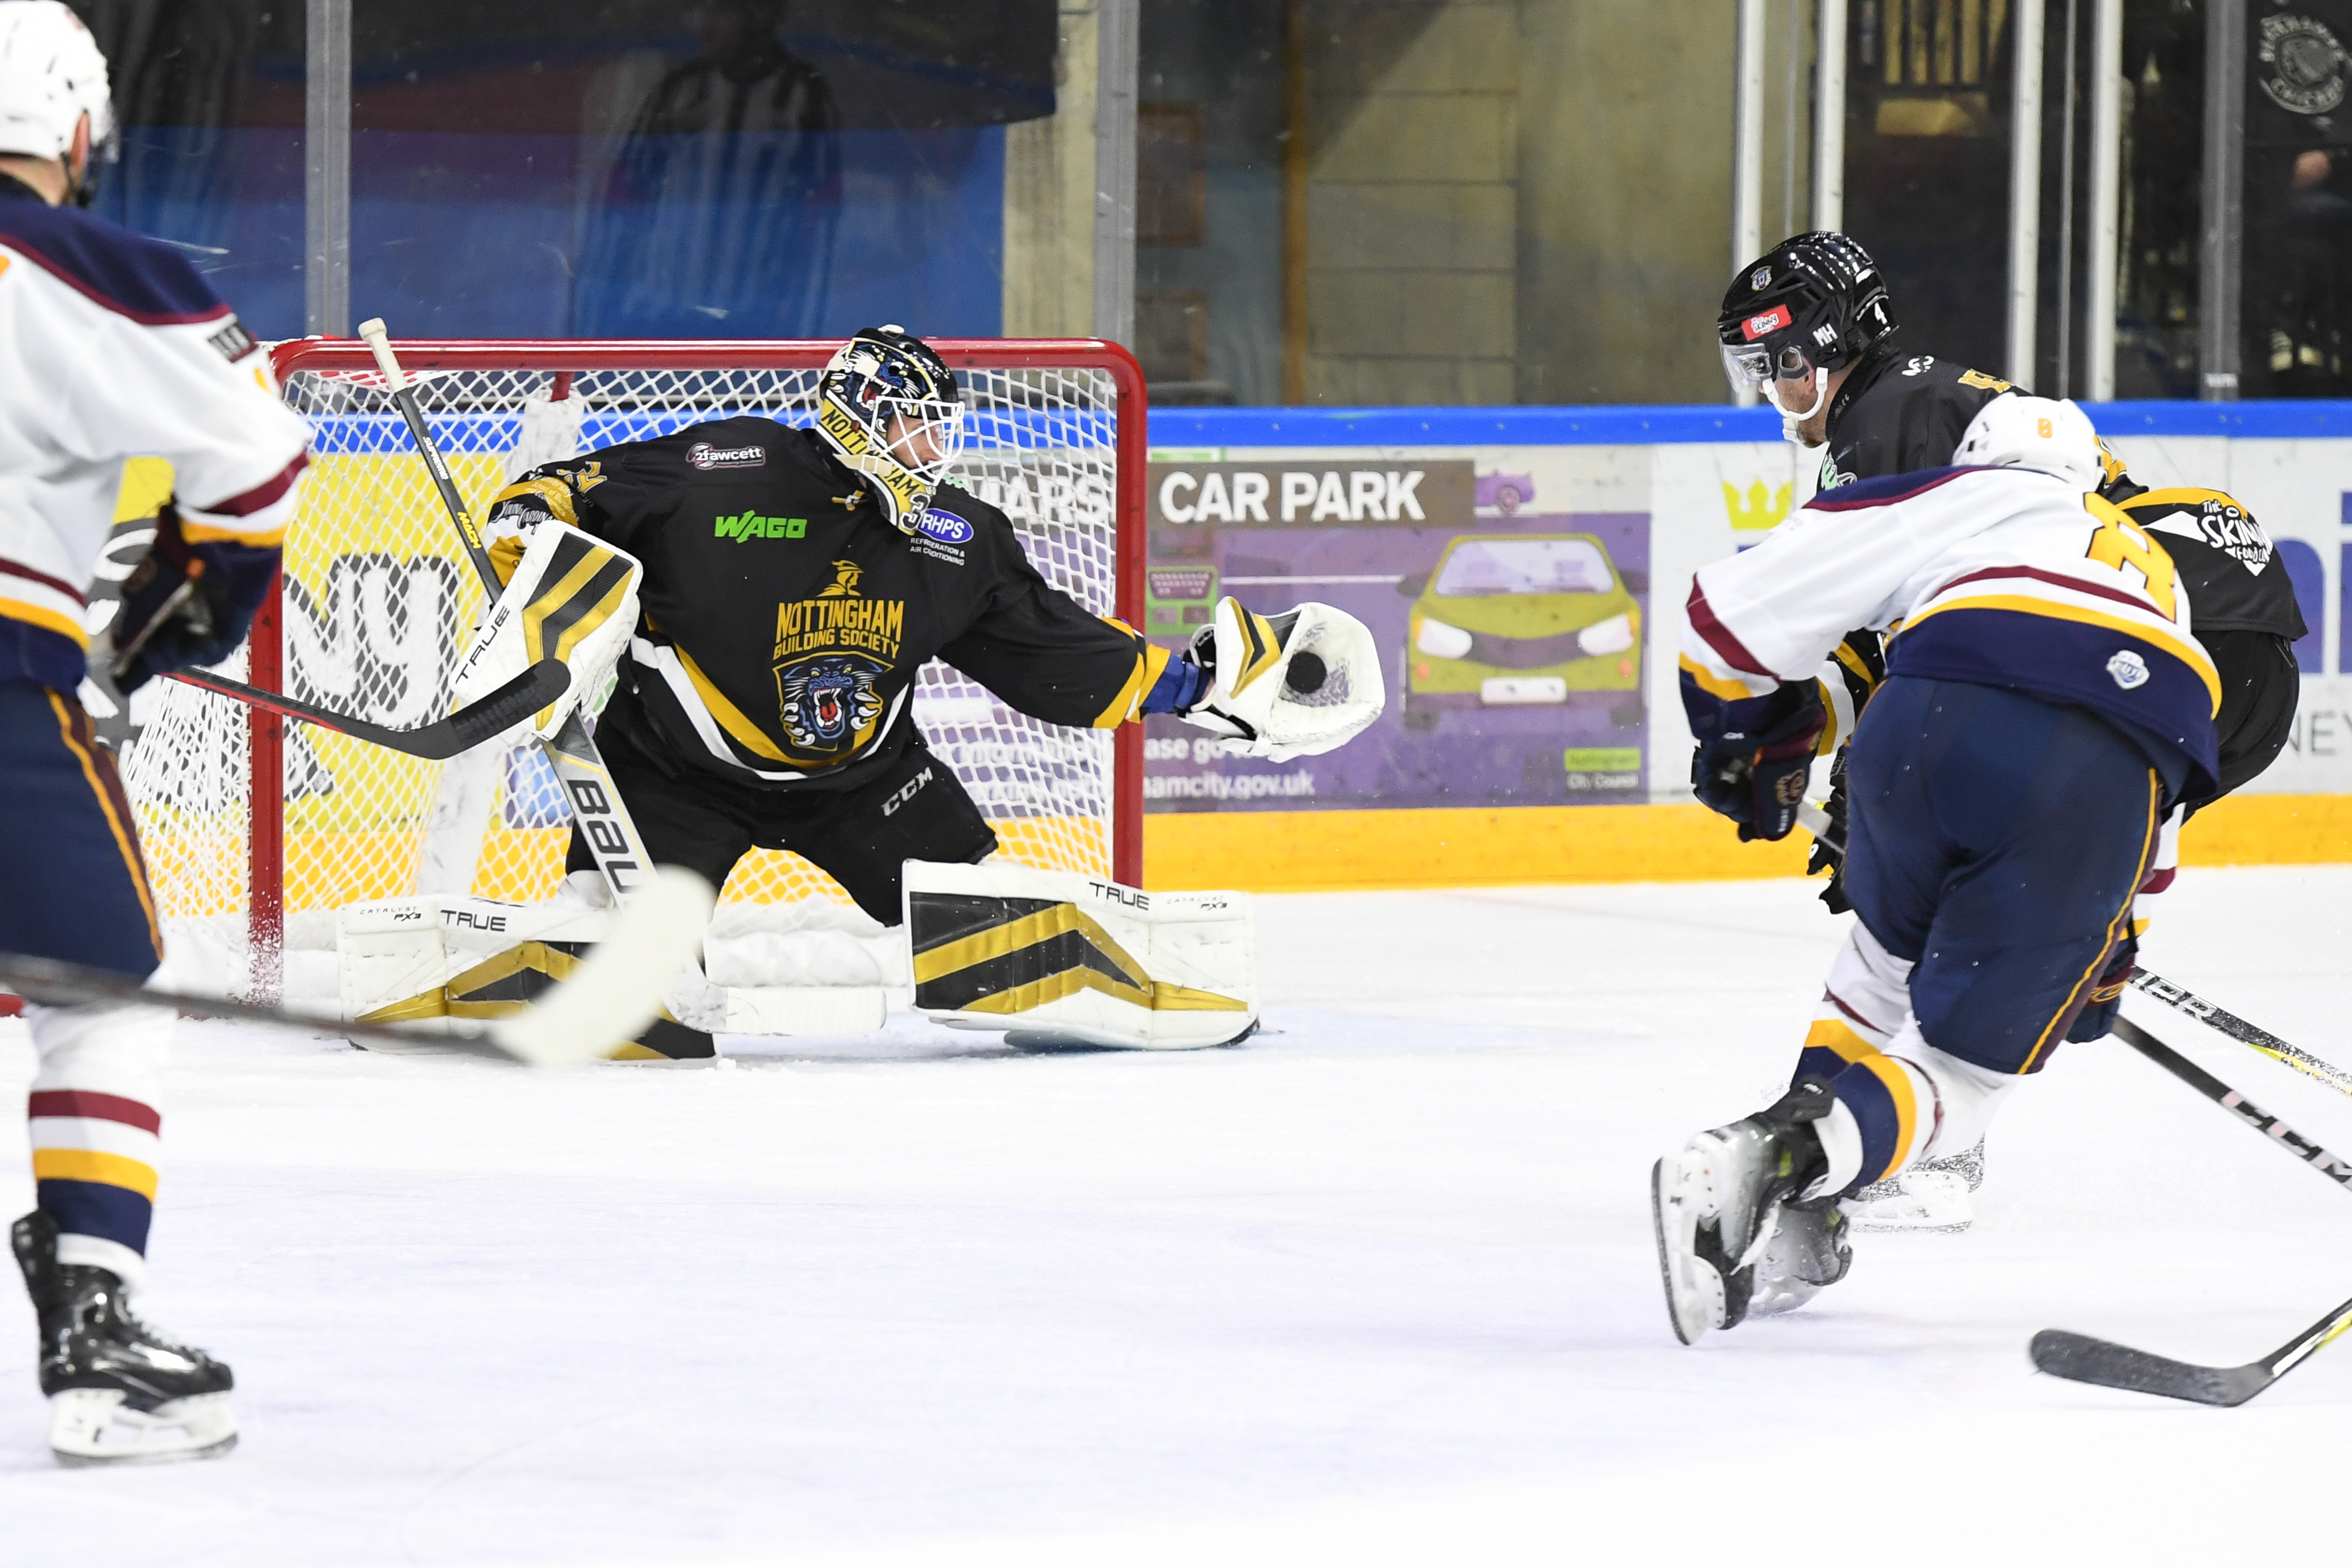 WATCH HIGHLIGHTS OF SATURDAY'S WIN OVER GUILDFORD Top Image